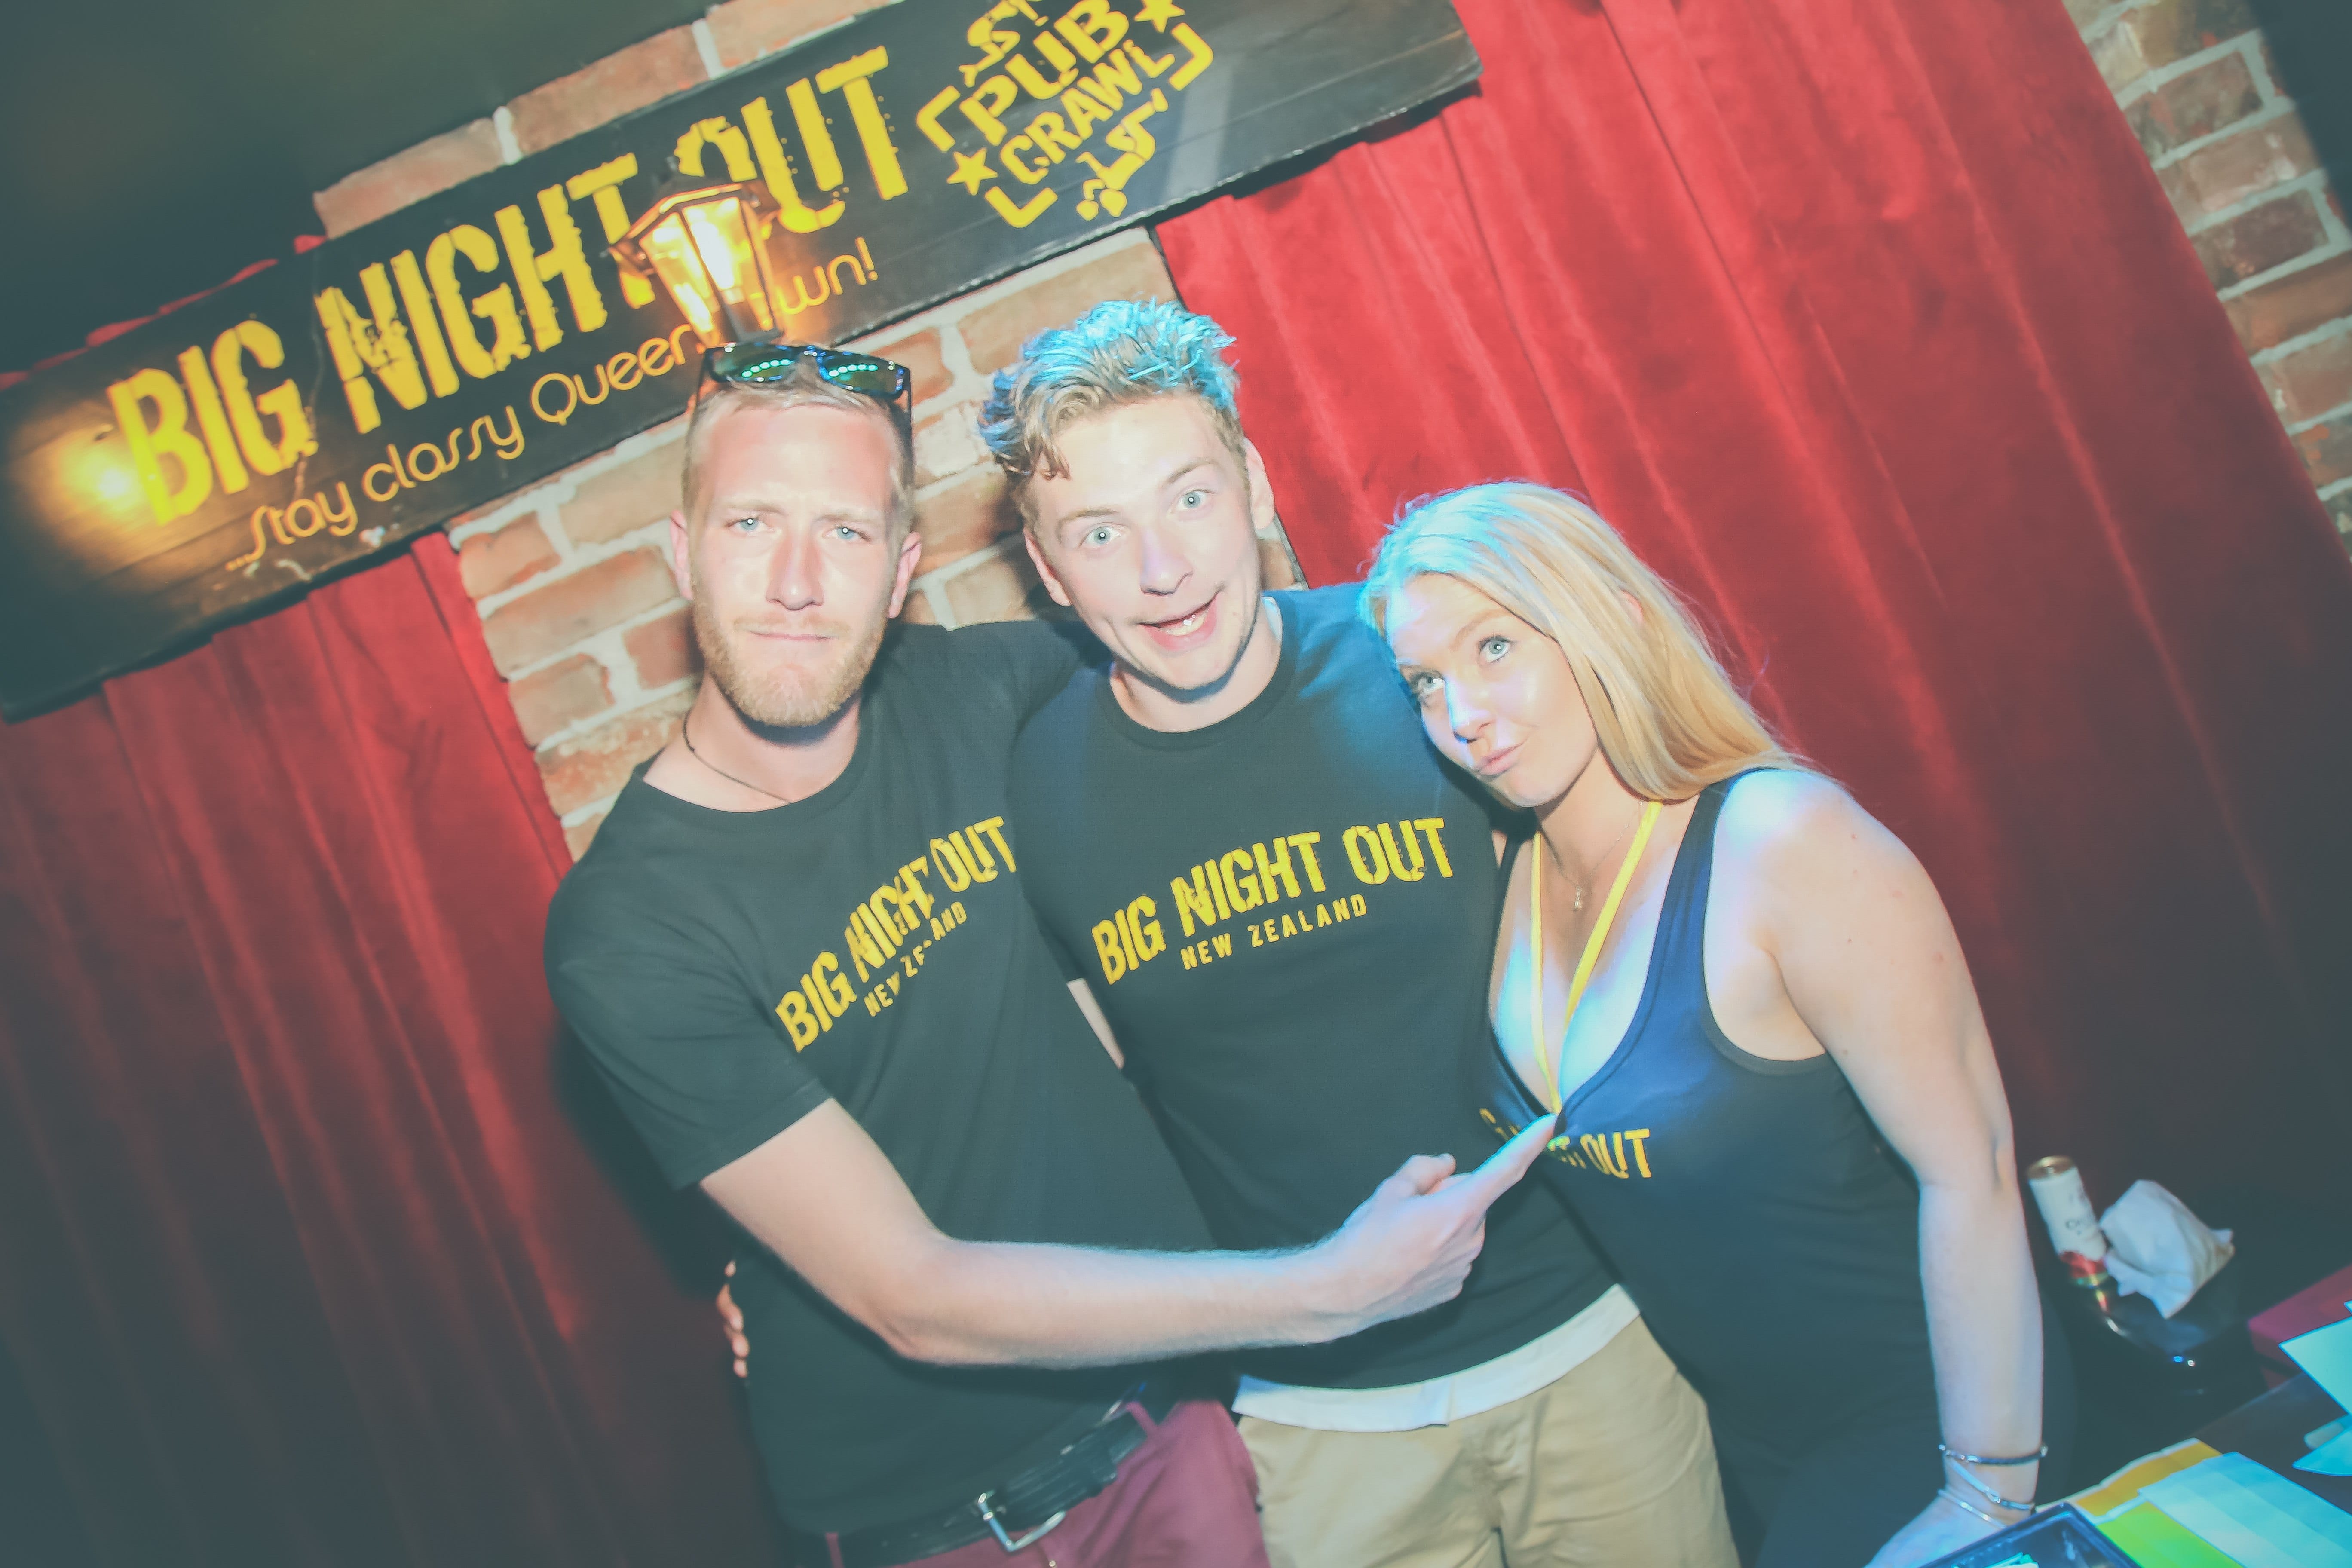 The big night out party team work new years eve queenstown pub crawl